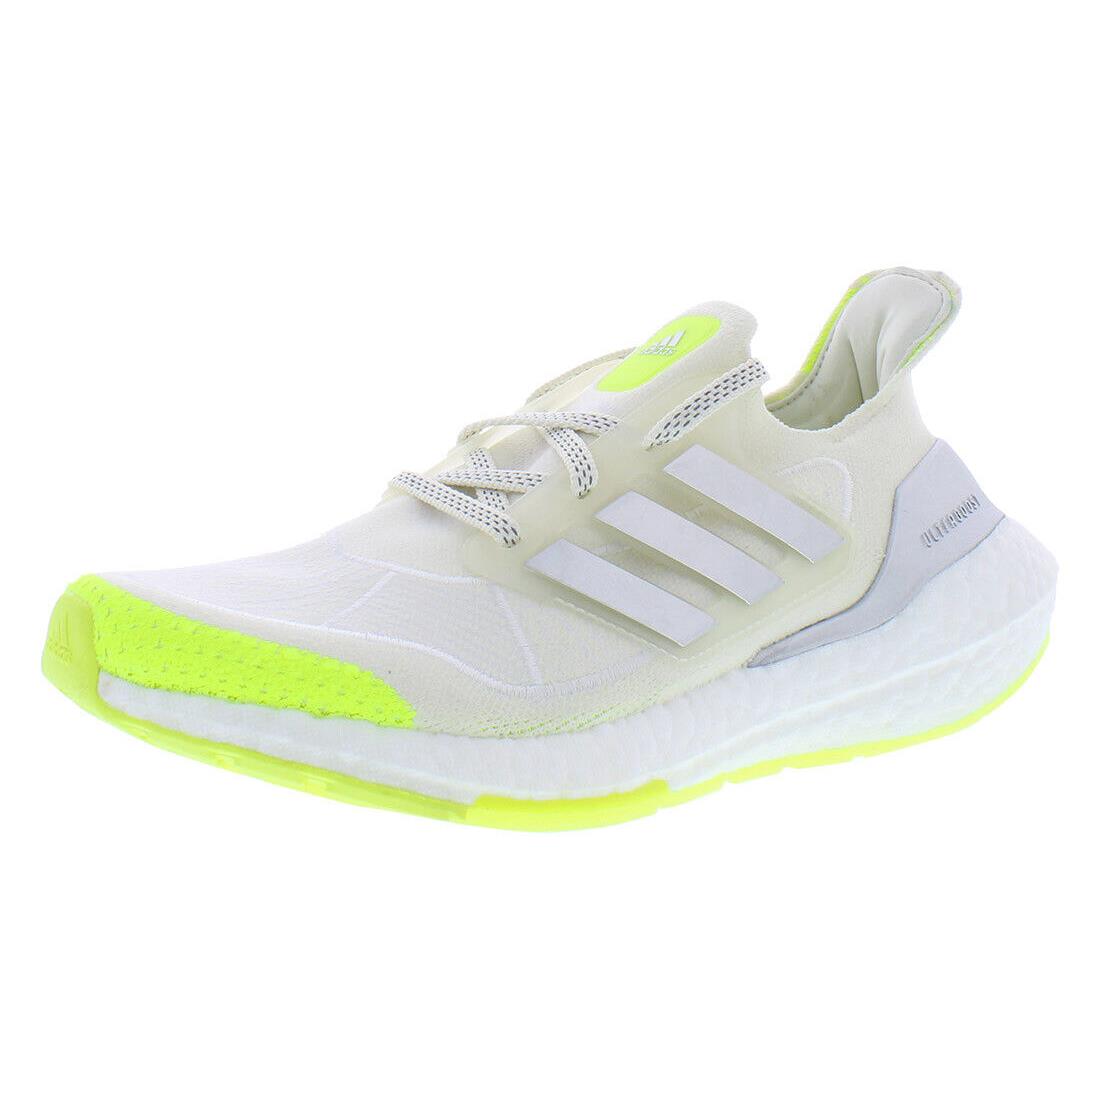 Adidas Ivy Park X Ultraboost 22 Mens Shoes - Taupe/Green, Main: Off-White